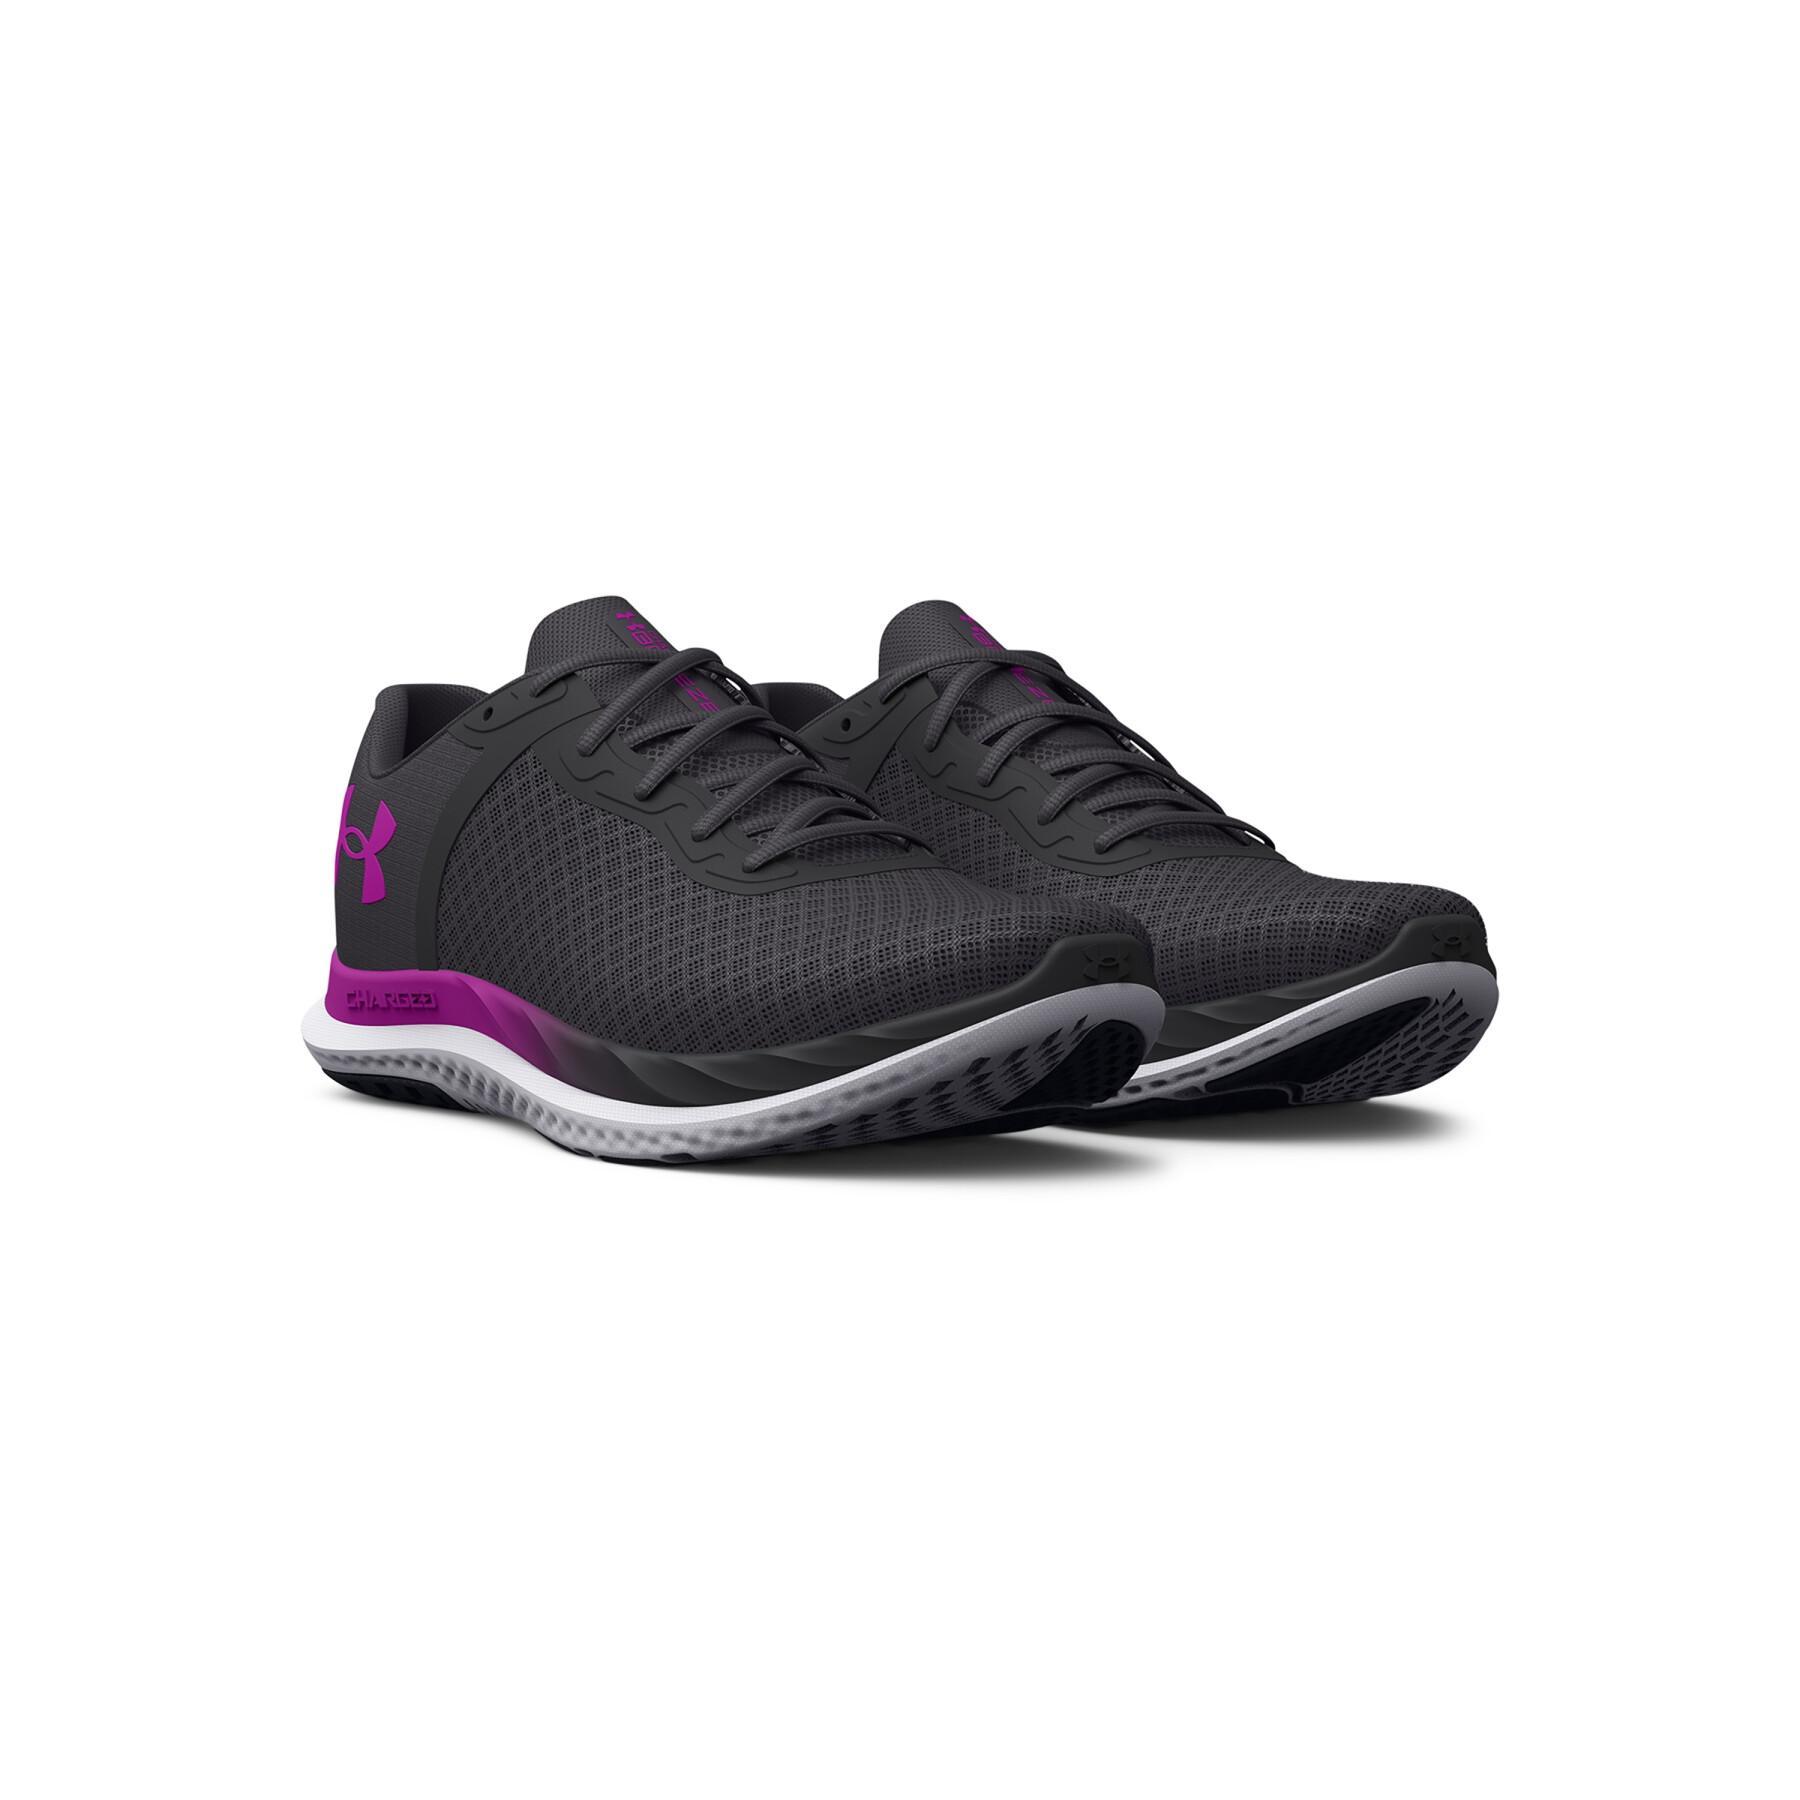 Zapatillas de running para mujer Under Armour Charged Breeze